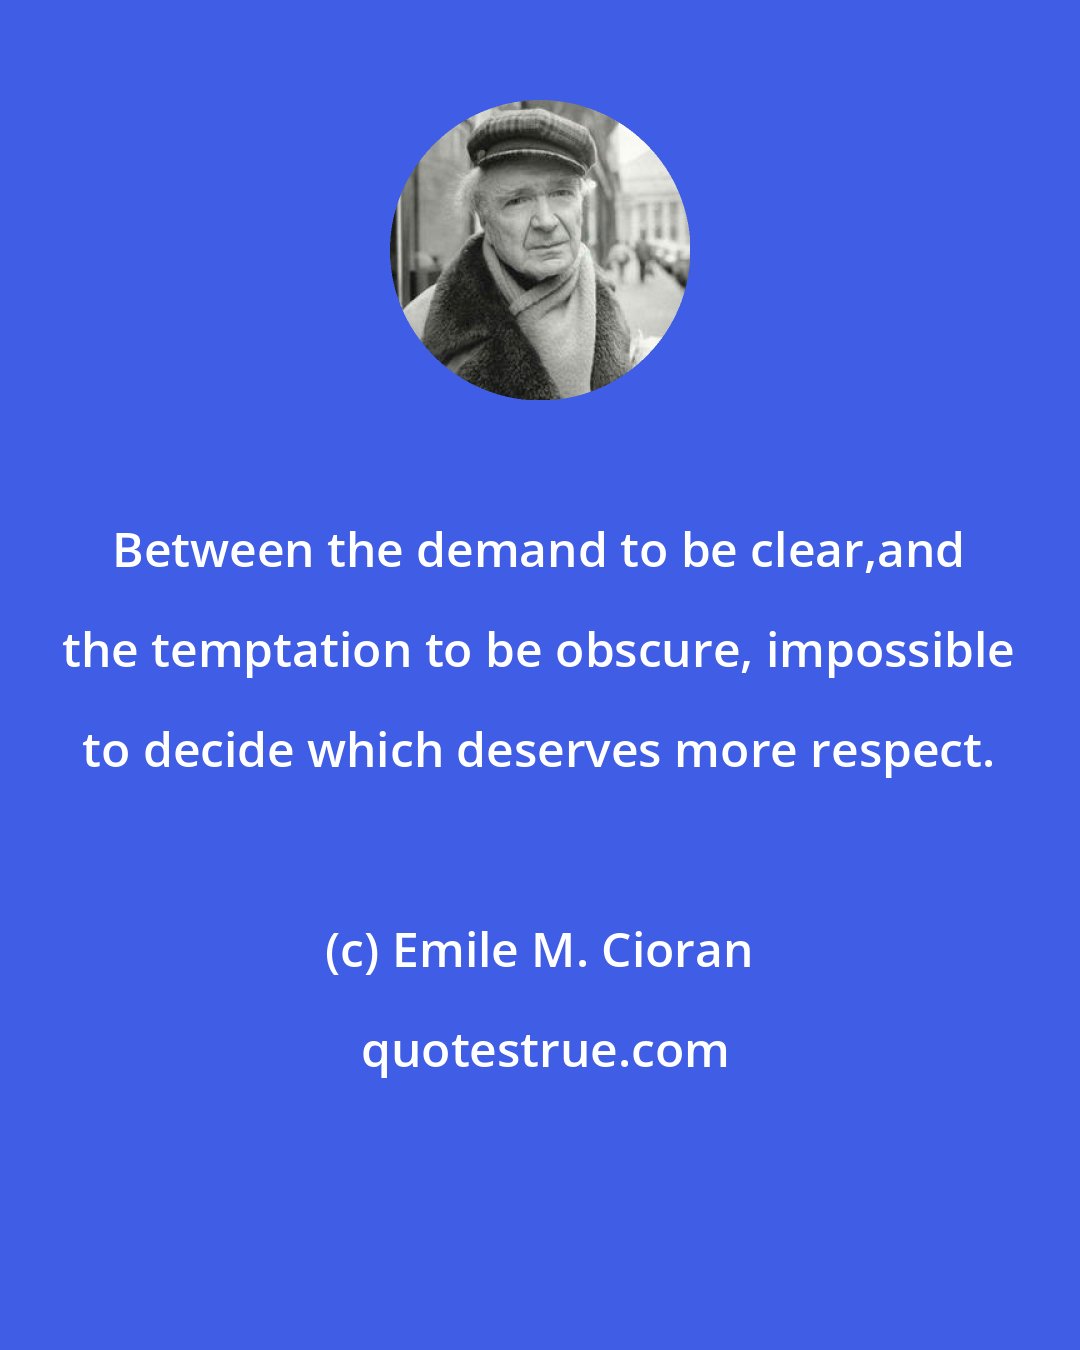 Emile M. Cioran: Between the demand to be clear,and the temptation to be obscure, impossible to decide which deserves more respect.